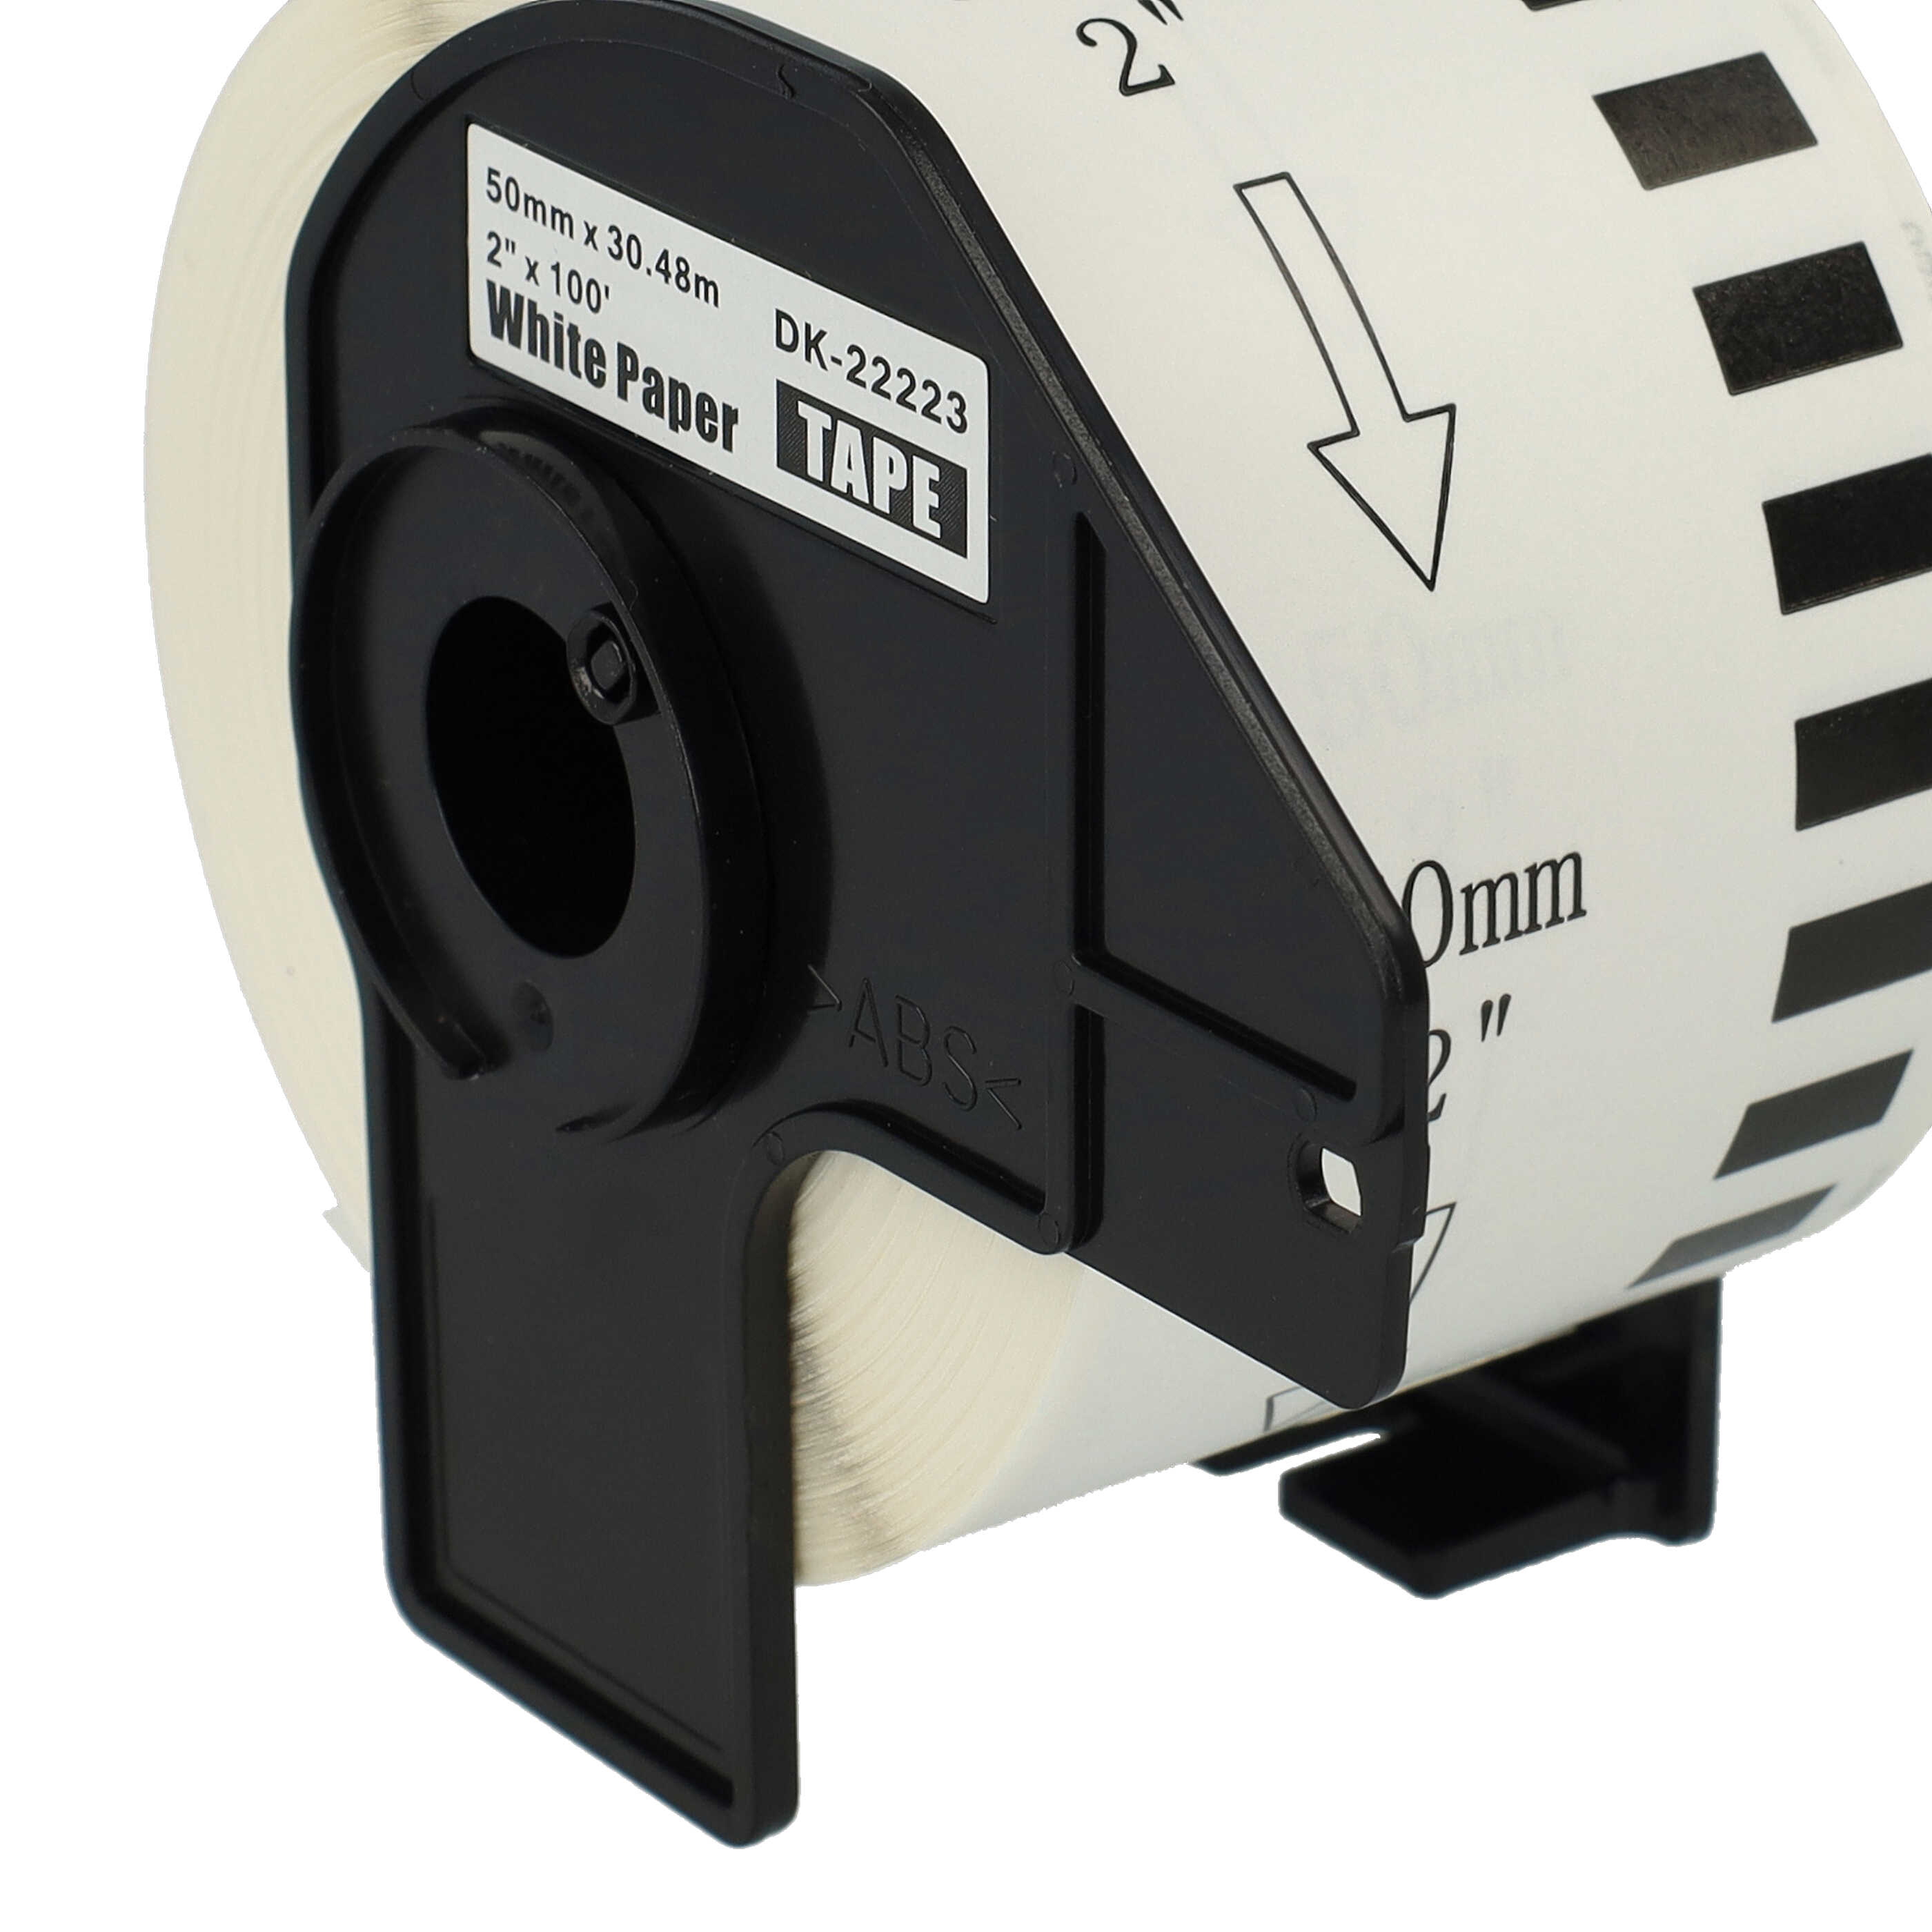 5x Labels replaces Brother DK-22223 for Labeller - Premium 50 mm x 30.48m + Holder